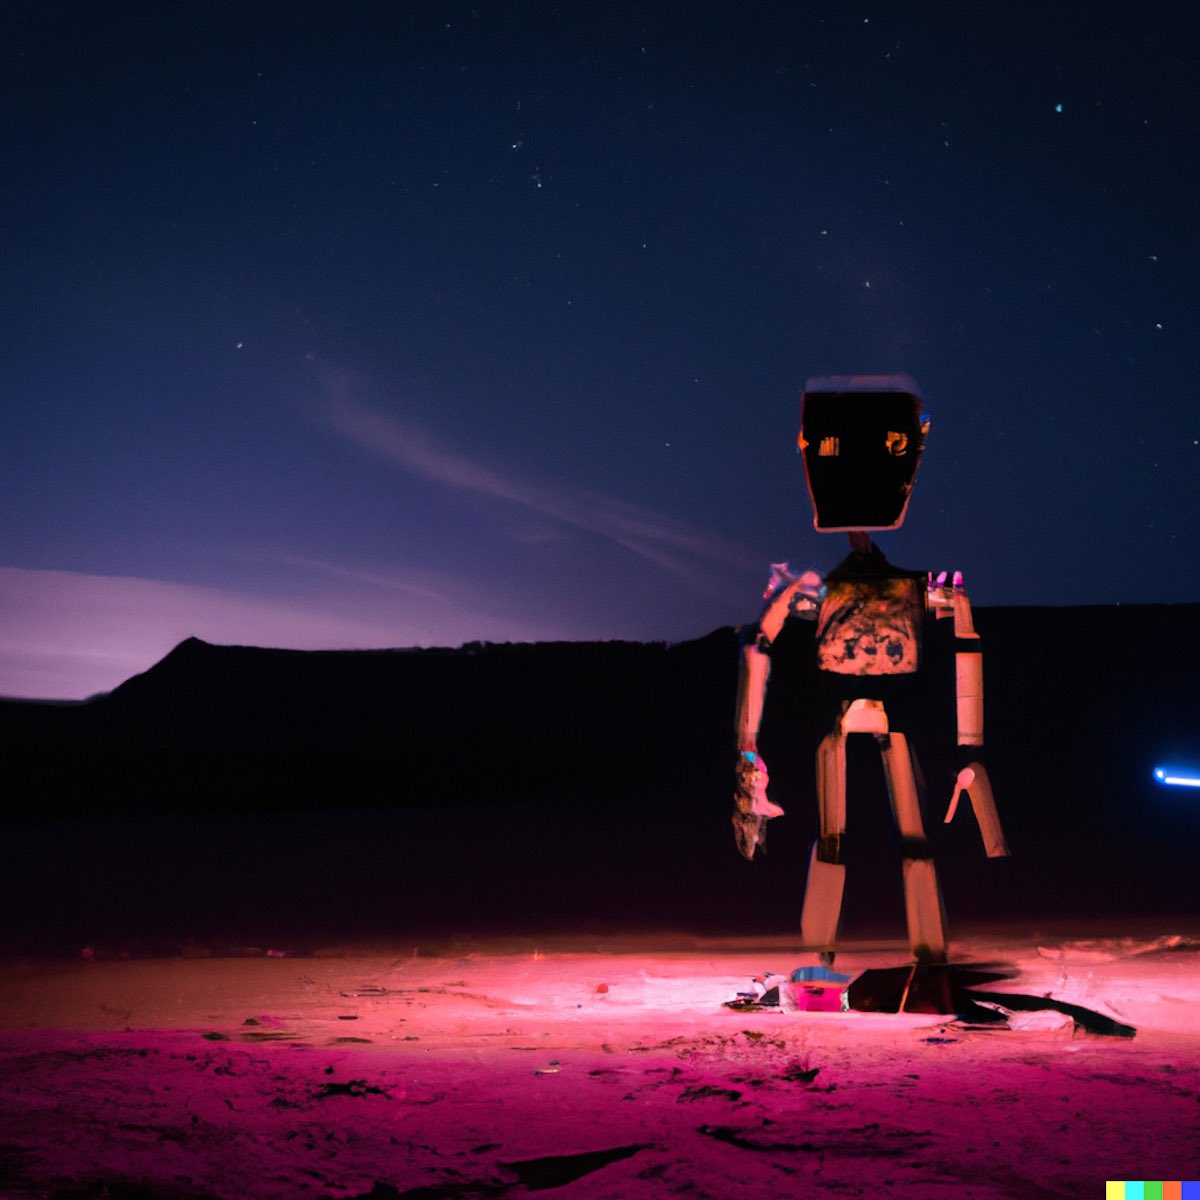 "Photo of a silhouette of a robot in a color lit desert at night learning constellation stars"
